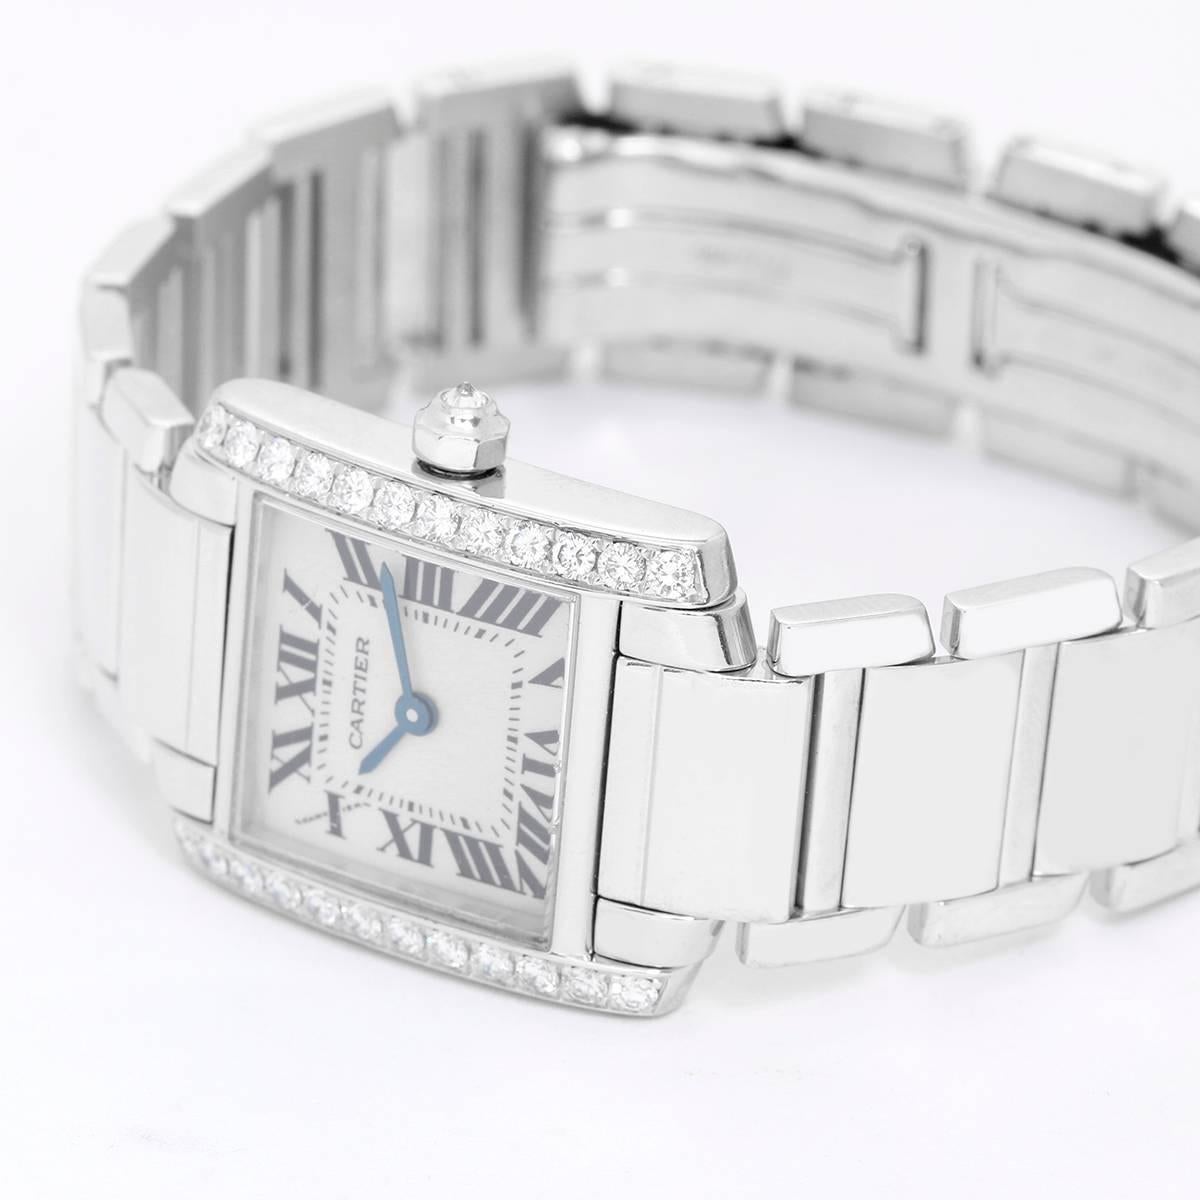 Cartier Tank Francaise 18k White Gold & Diamonds Ladies Watch WE1002S3 -  Quartz. 18k white gold case with factory diamond bezel (20mm x 25mm). Ivory colored dial with black Roman numerals. 18k white gold Cartier bracelet with deployant clasp.